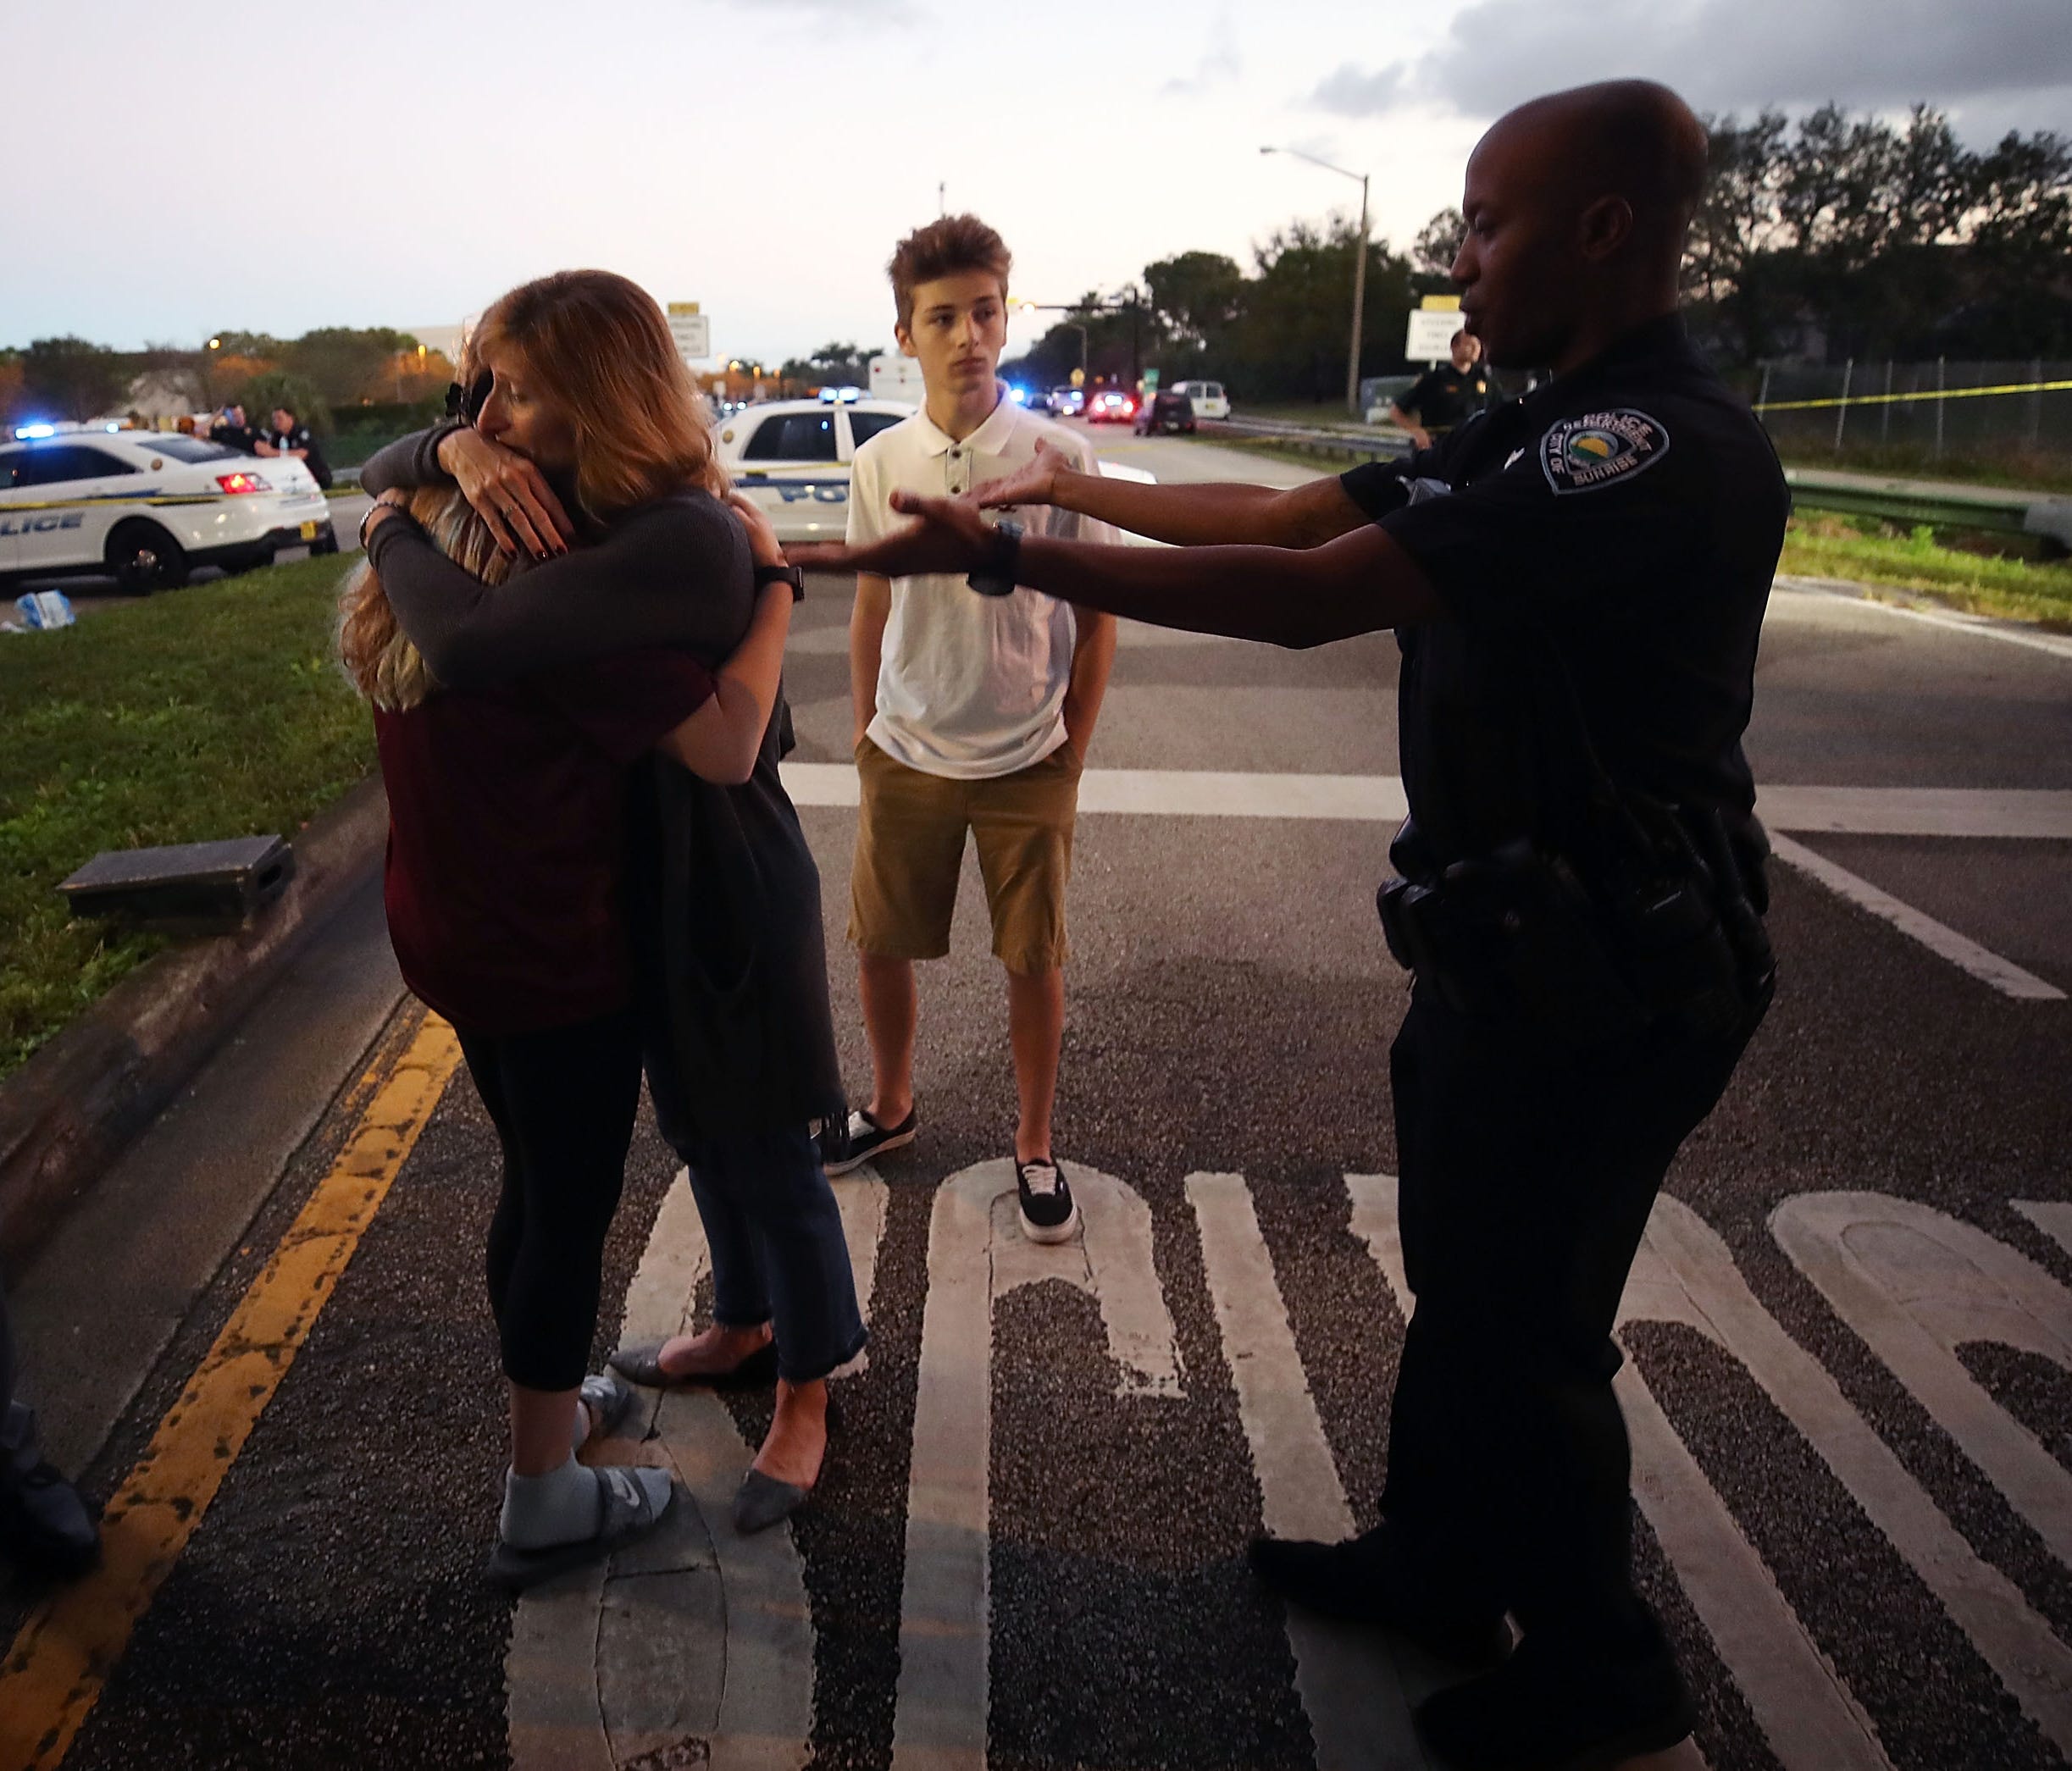 Kristi Gilroy hugs a young woman as a police officer tries to clear a closed road at a police checkpoint near Marjory Stoneman Douglas High School where 17 people were killed by a gunman Feb. 15, 2018, in Parkland, Fla.  Police arrested the suspect a